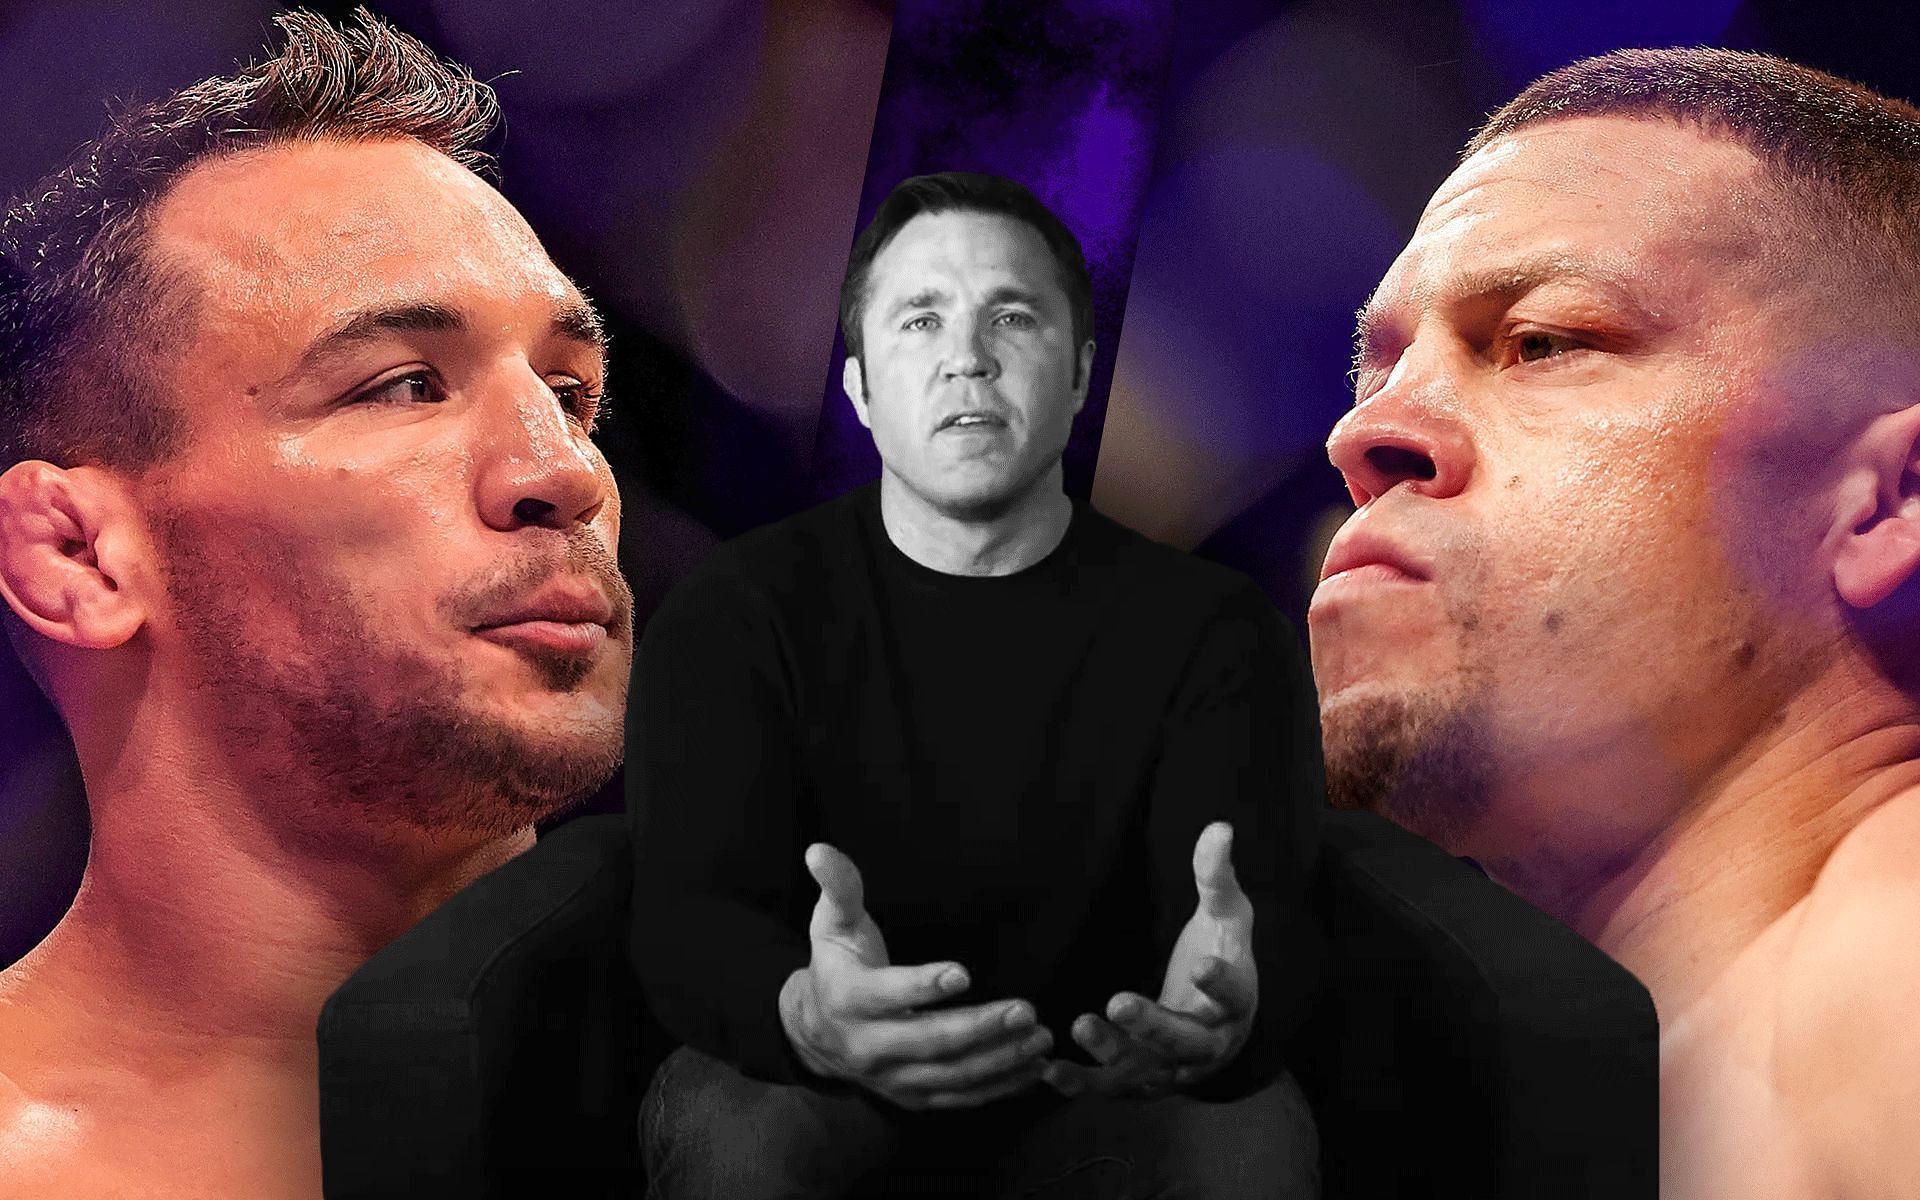 From left to right: Michael Chandler, Chael Sonnen, and Nate Diaz [Center image via Chael Sonnen on YouTube]